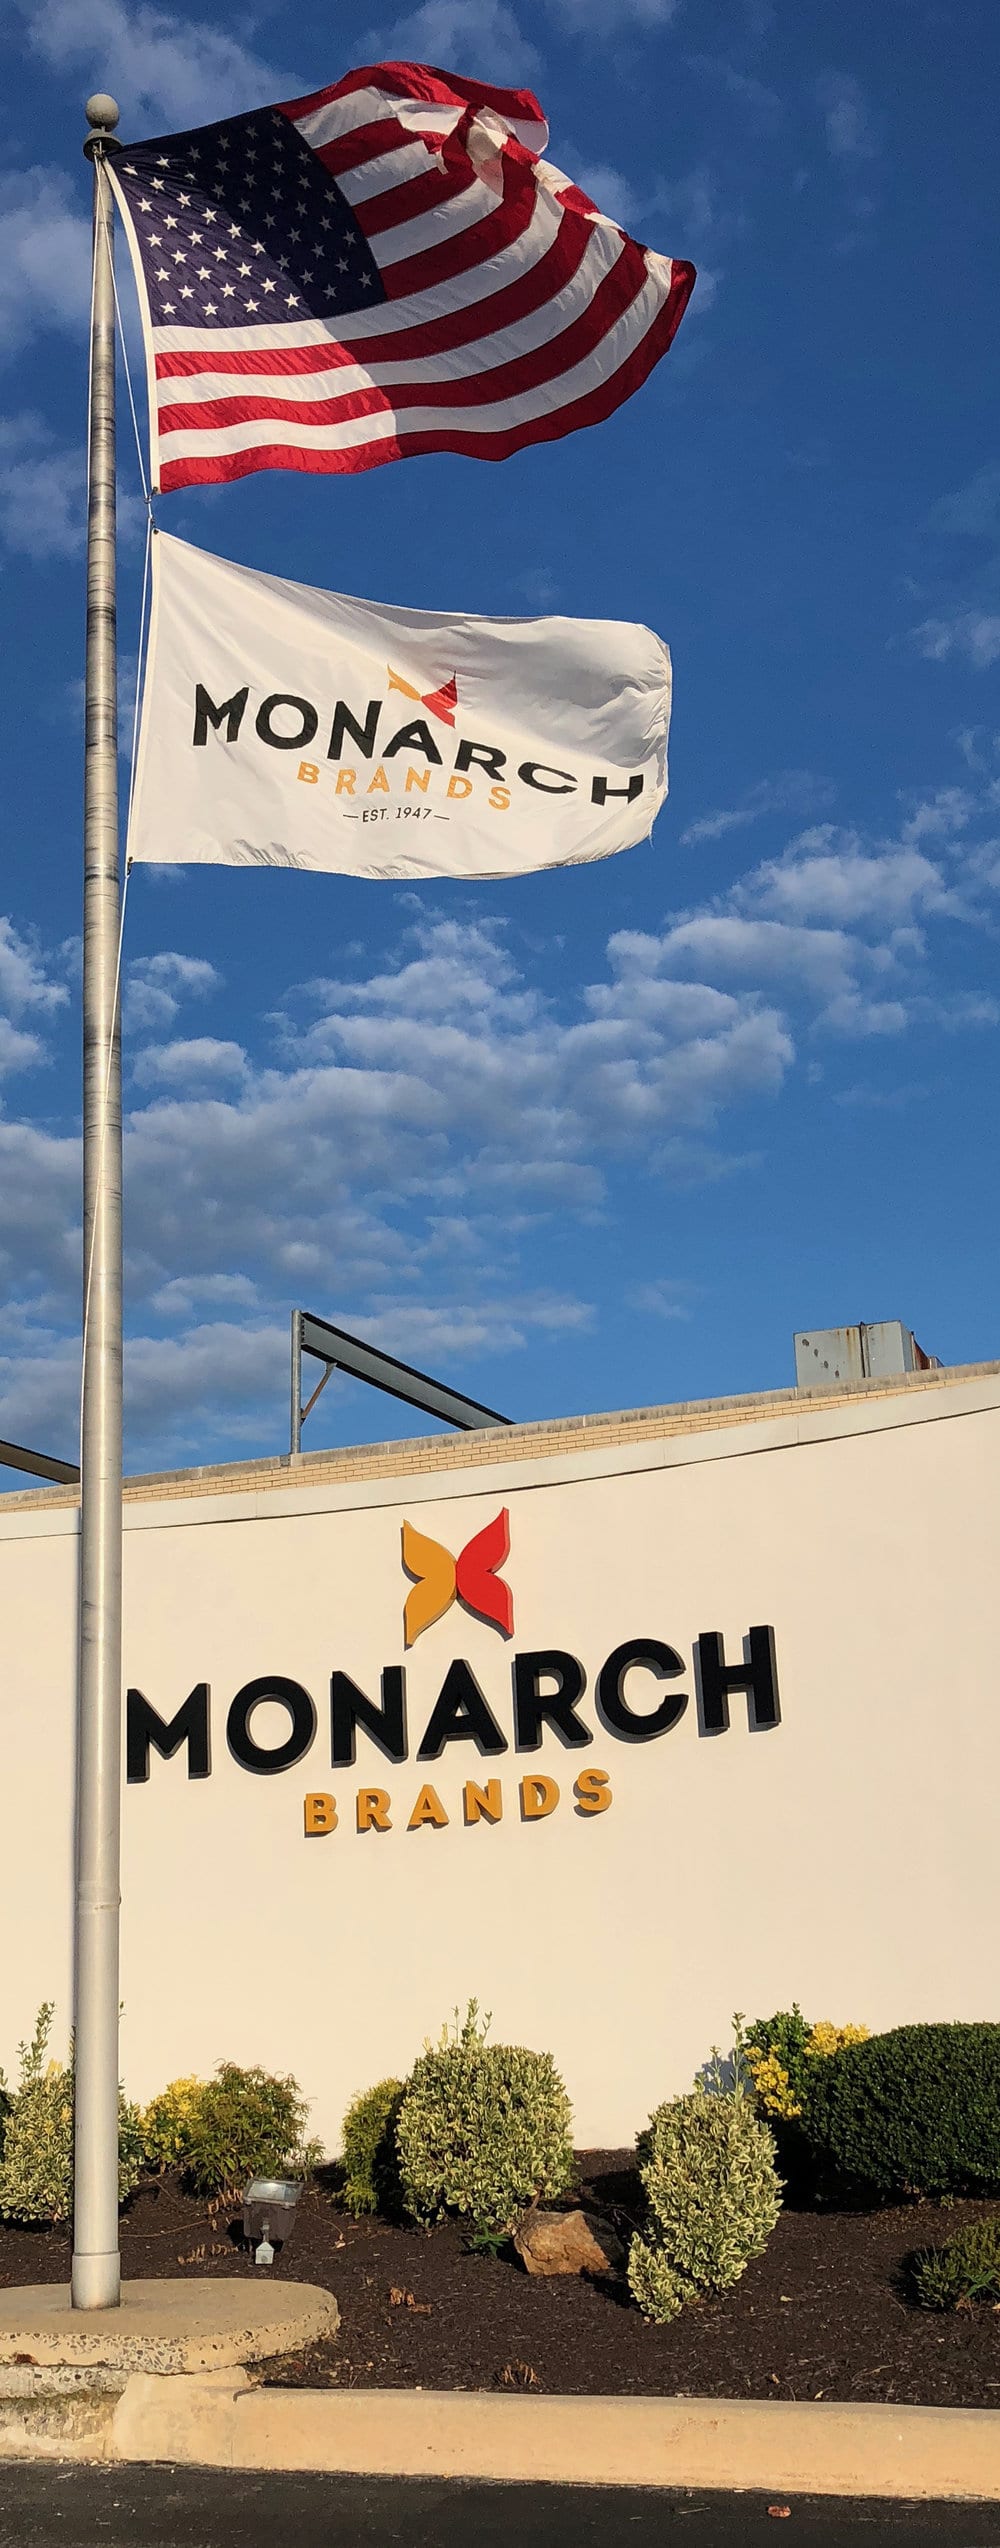 American and Monarch Brands Flag in front of Monarch Brands sign